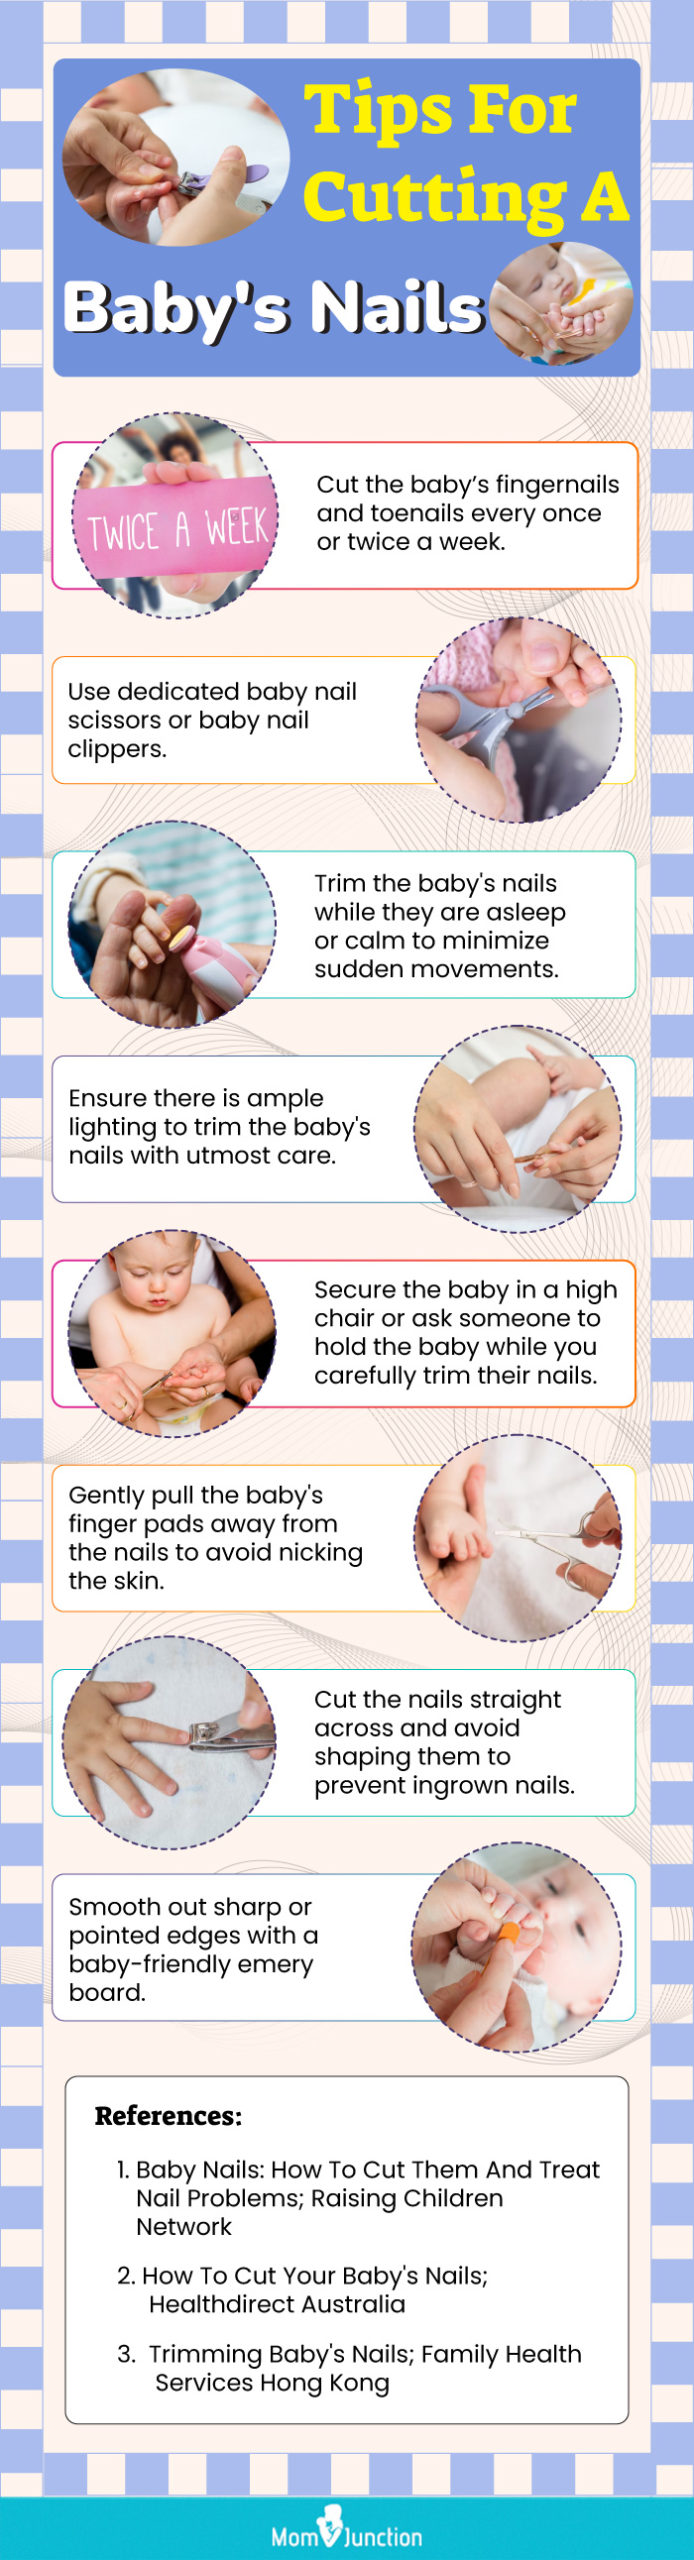 Tips For Cutting A Baby's Nails (infographic)